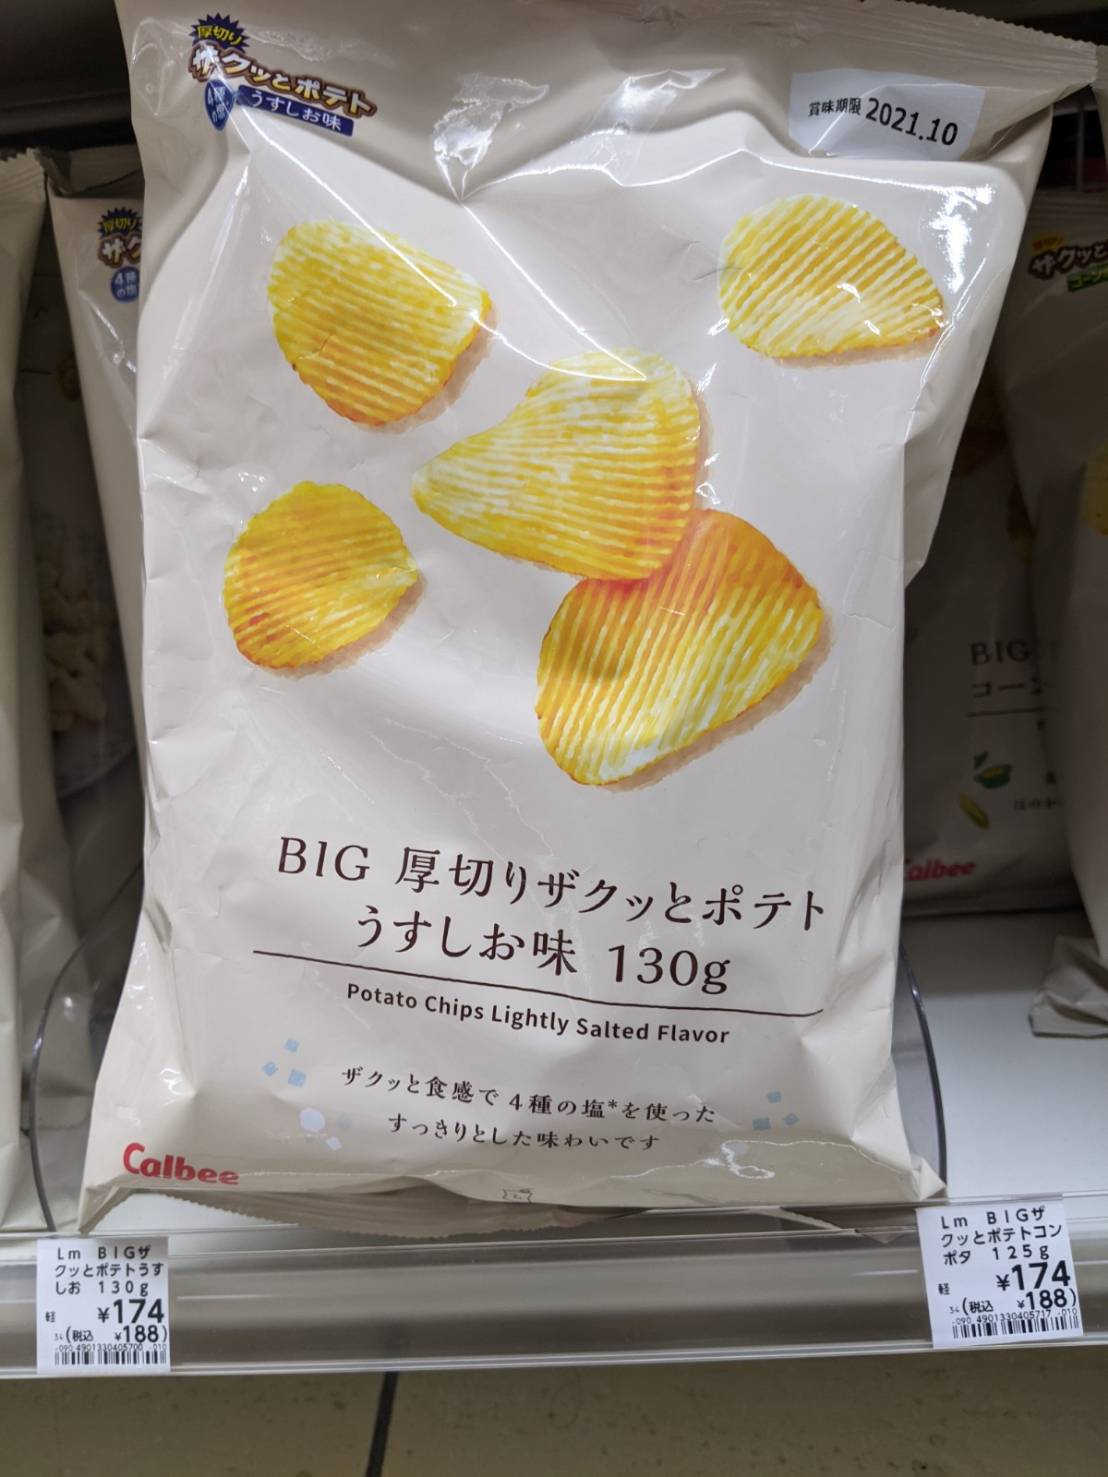 Lawson Calbee Potato Chips Lightly Salted Flavor